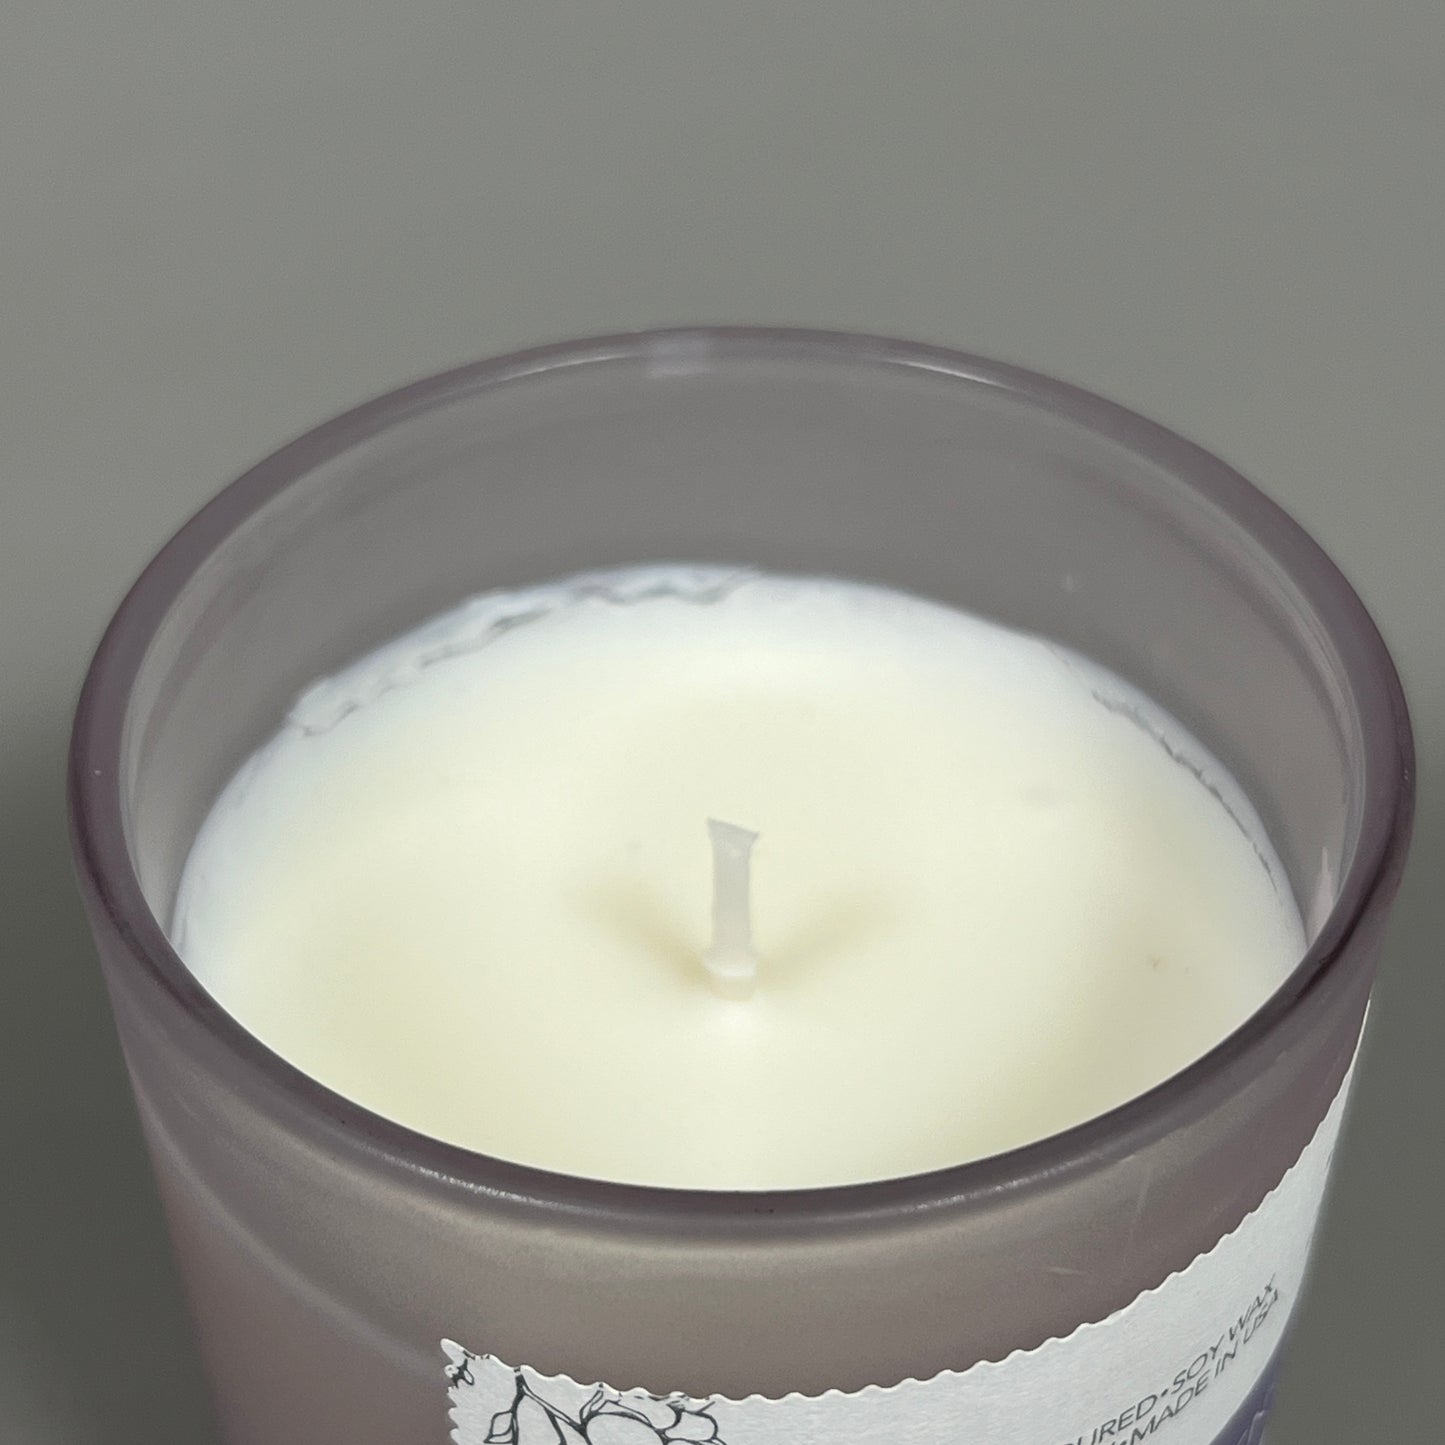 SAKS FIFTH AVENUE Sweet Cotton Hand Poured Soy Wax Candle 8 fl oz (New)